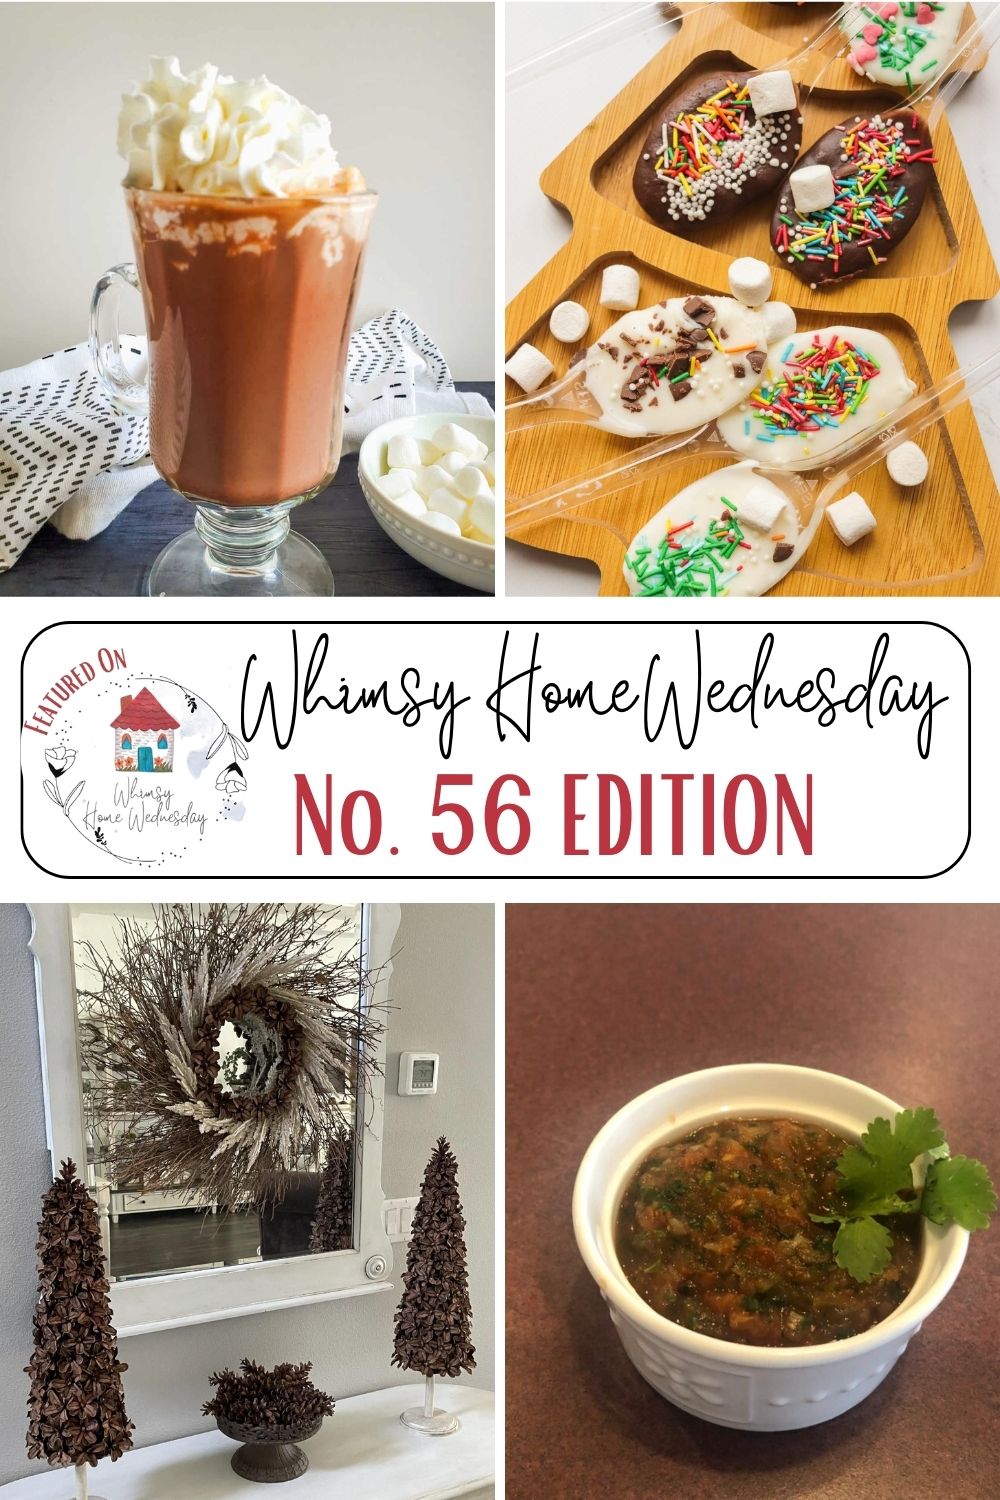 Join us on Whimsy Home Wednesday Blog Link Party No. 56 and see host projects, the features from the previous week and link up your posts!